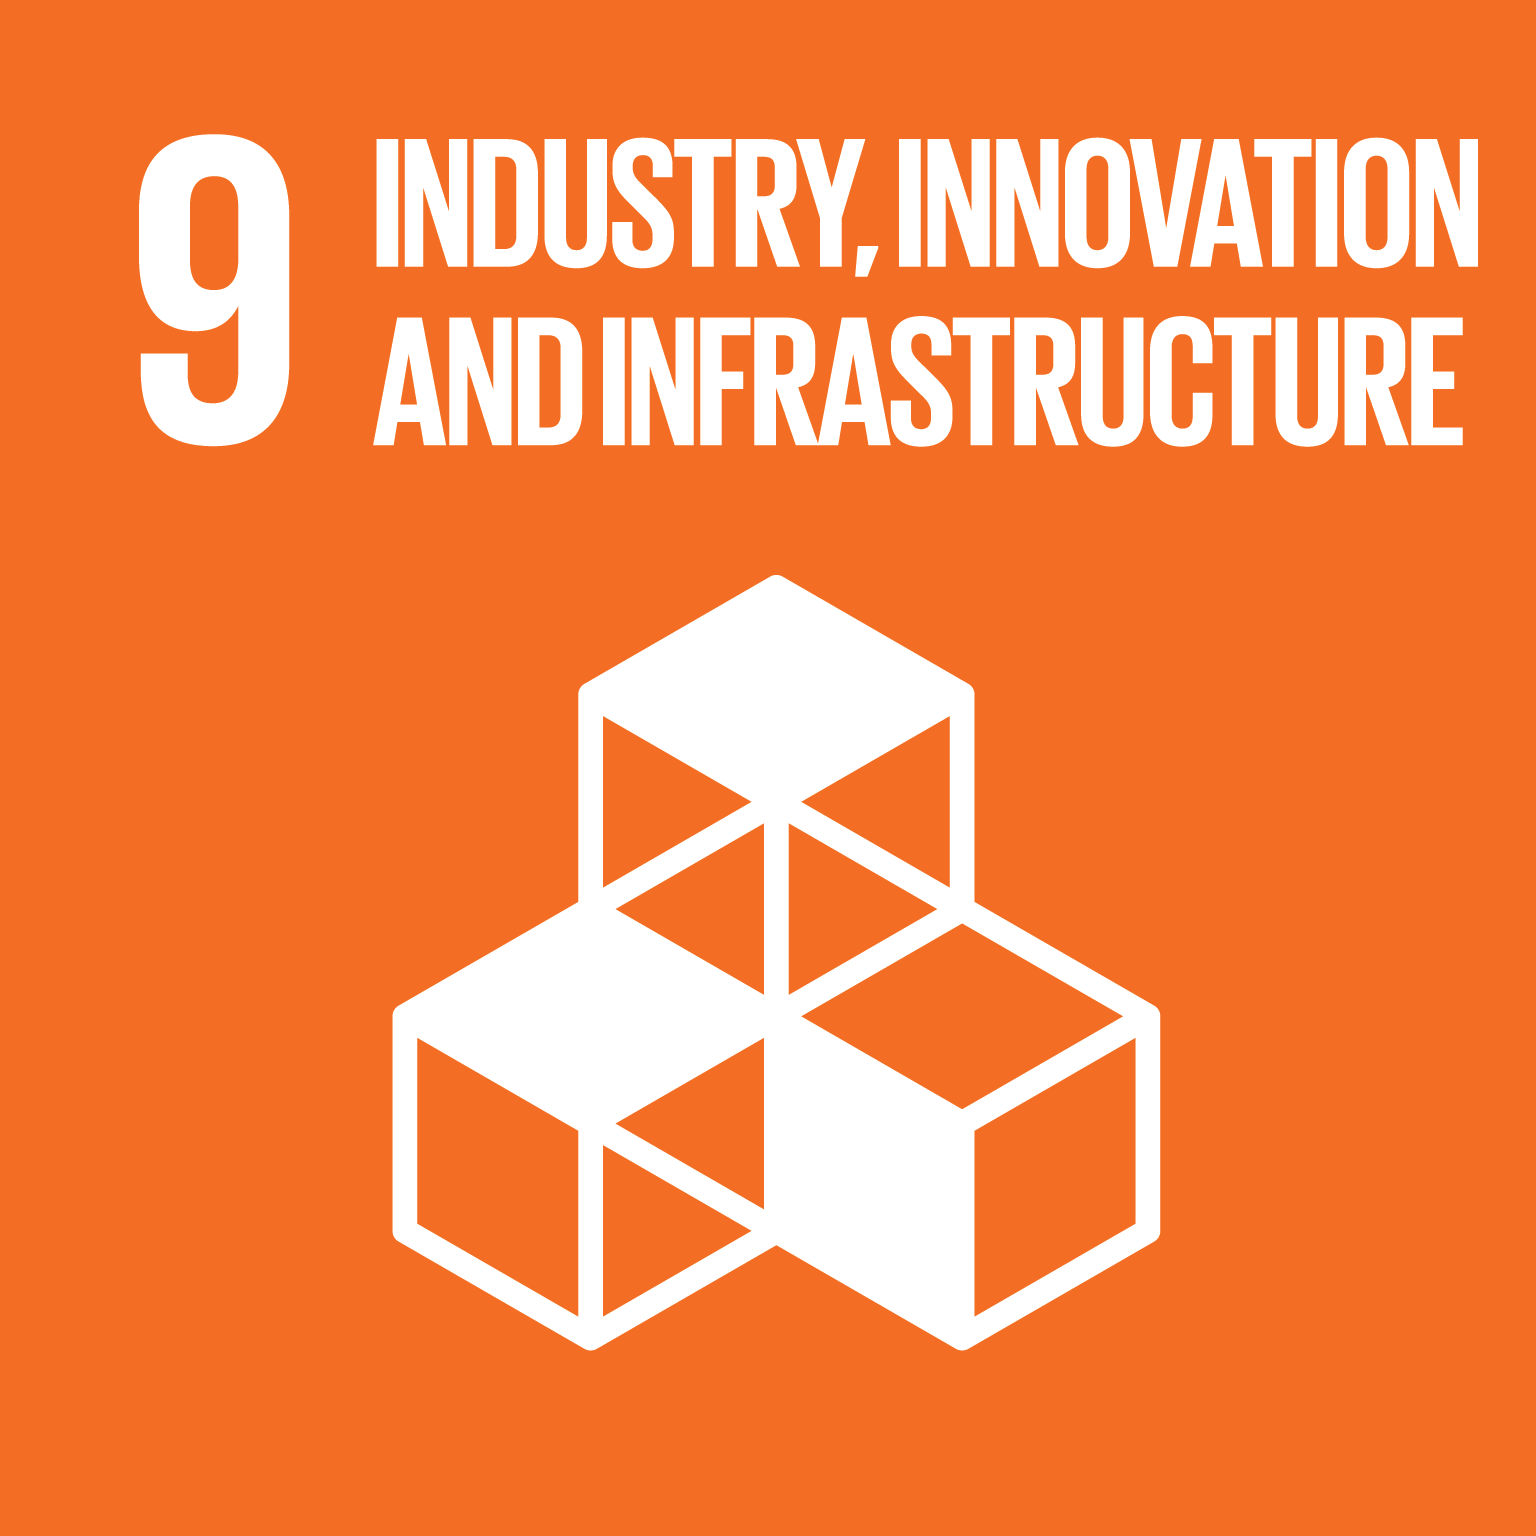 Sustainable Development Goal: Industry, Innovation, and Infrastructure